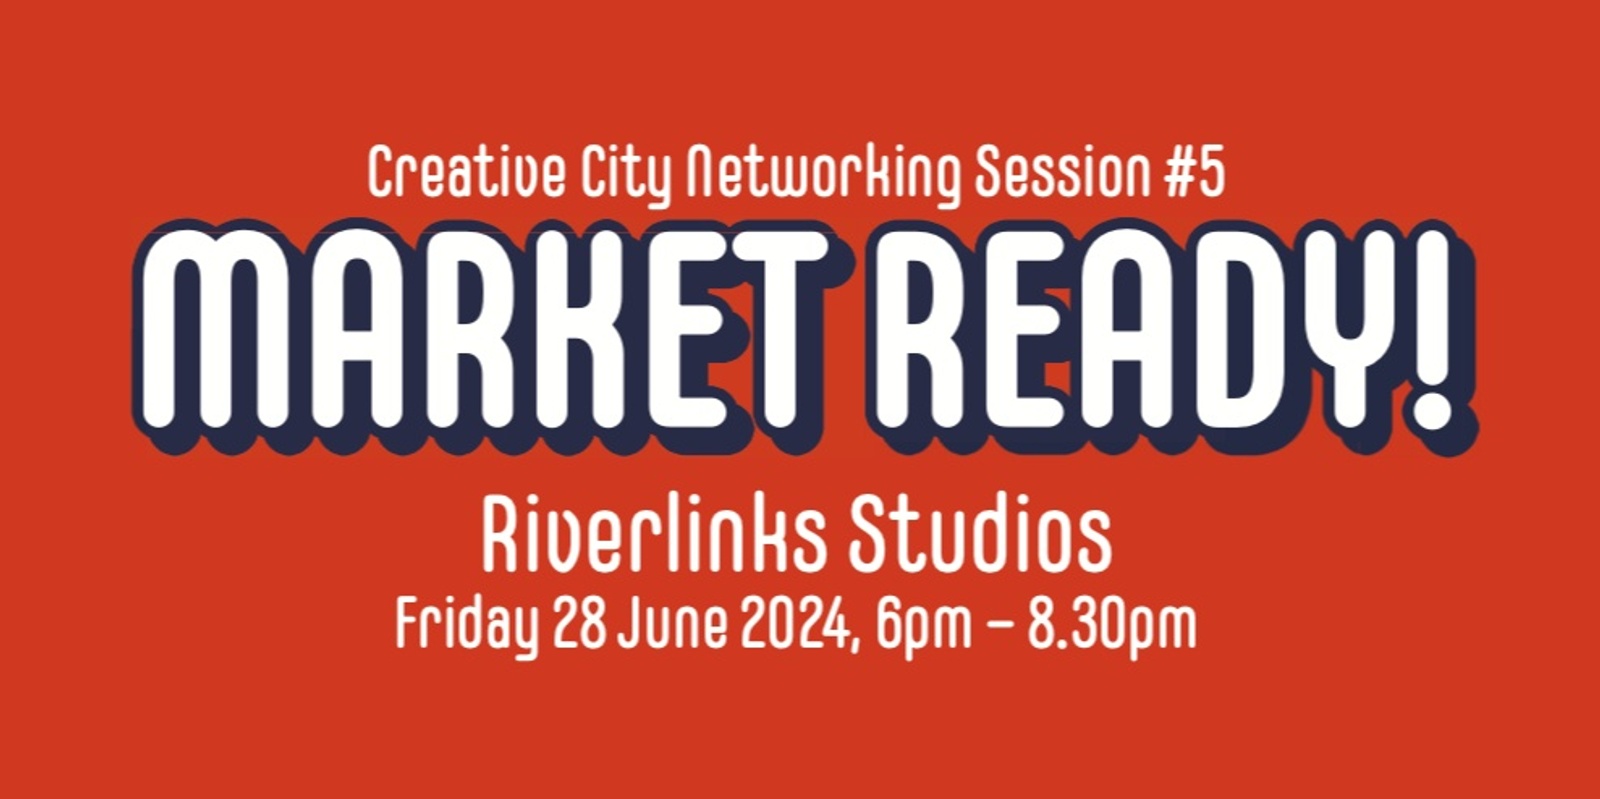 Banner image for Creative City Networking Sessions #5: Market Ready!